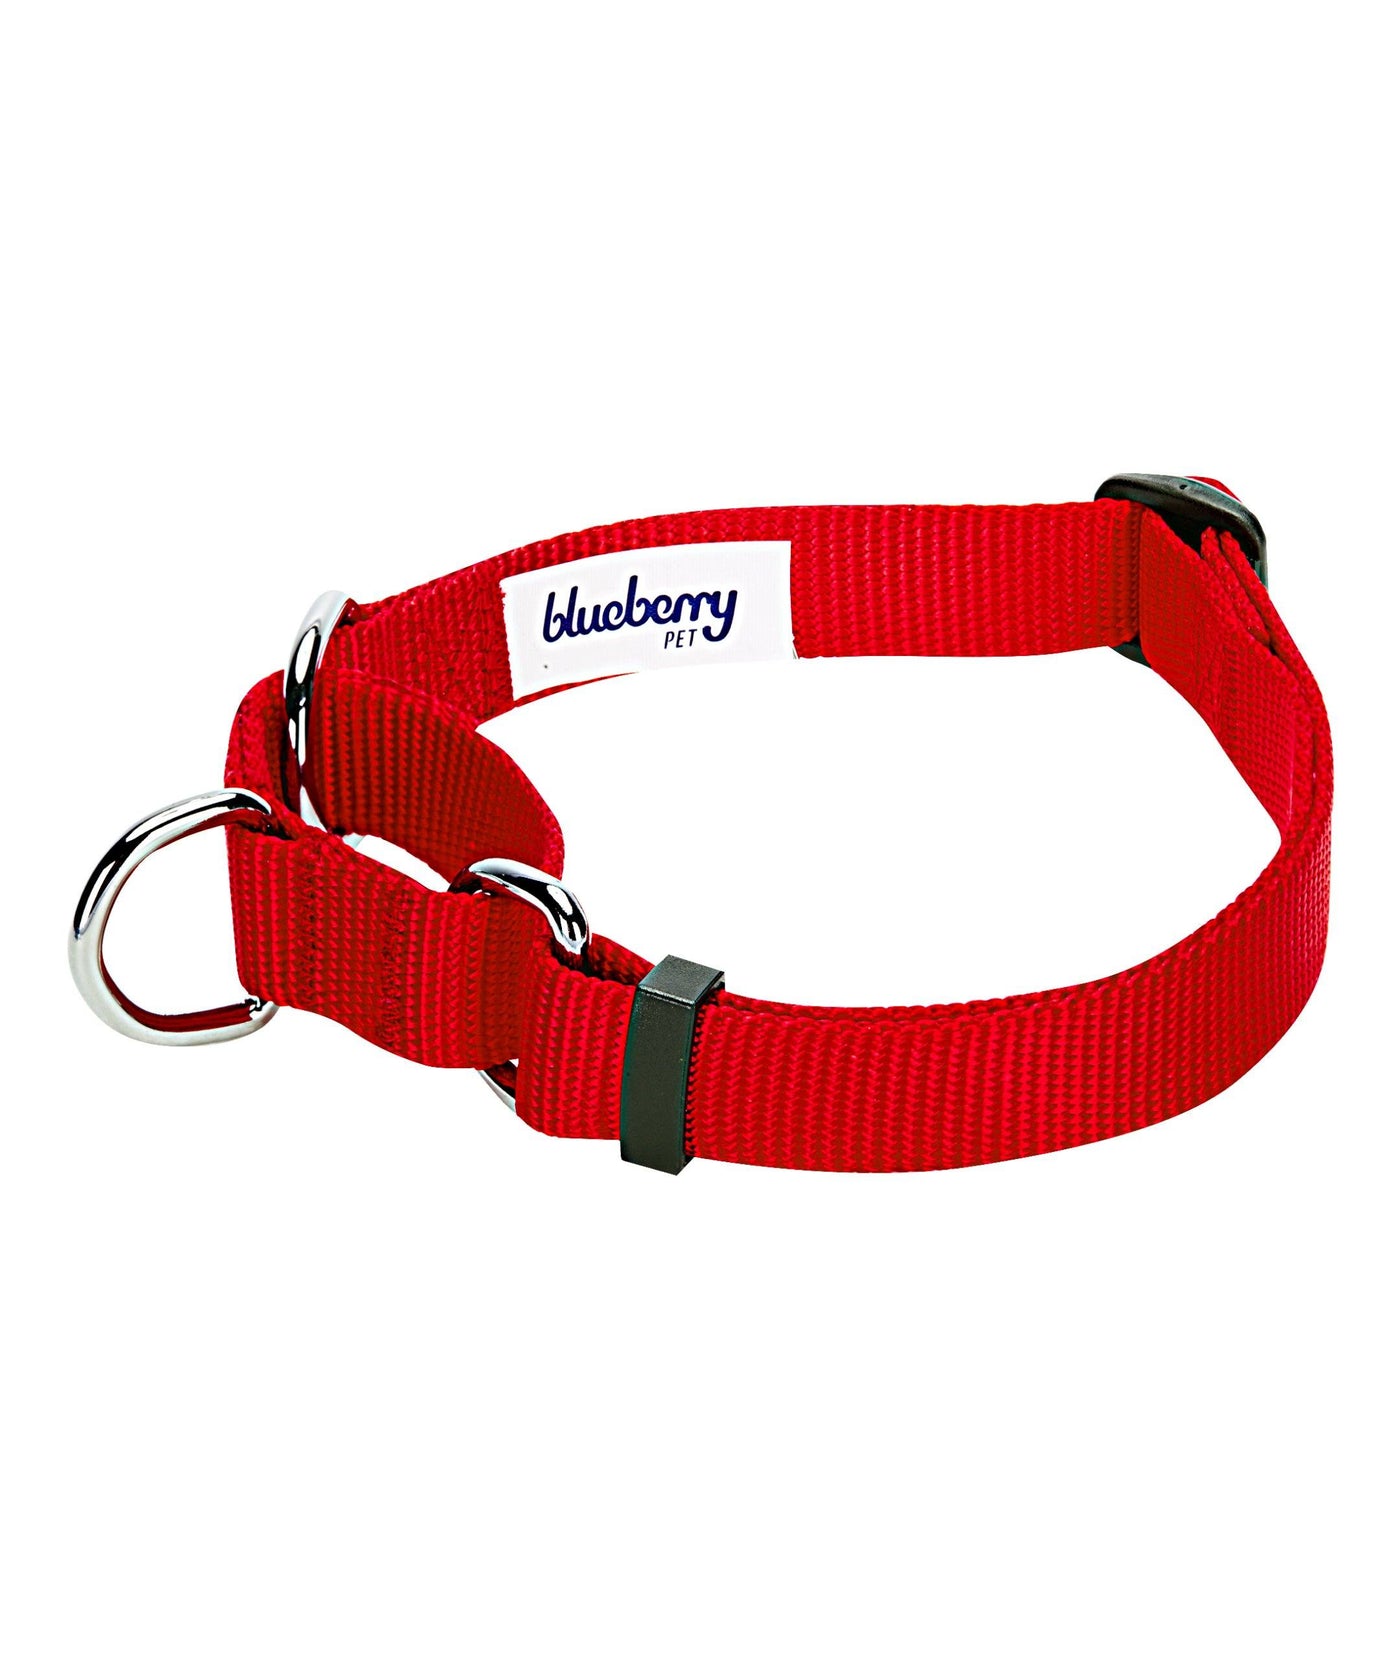 Blueberry Pet Martingale Dog Collar Collar Blueberry Pet Red S 